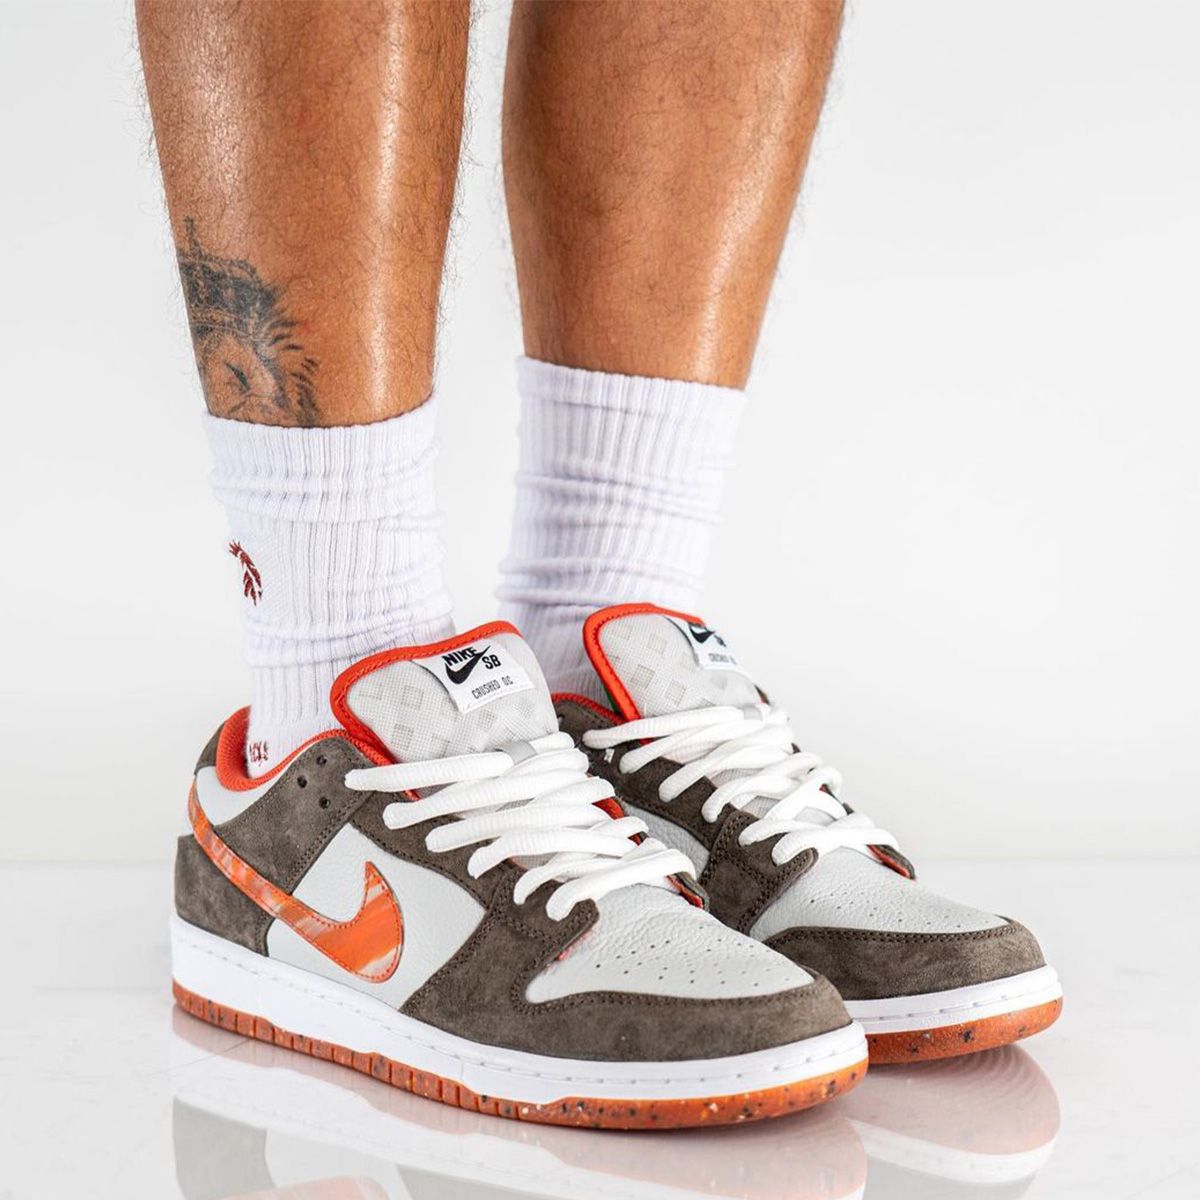 Where to Buy the Crushed D.C. x Nike SB Dunk Low | House of Heat°